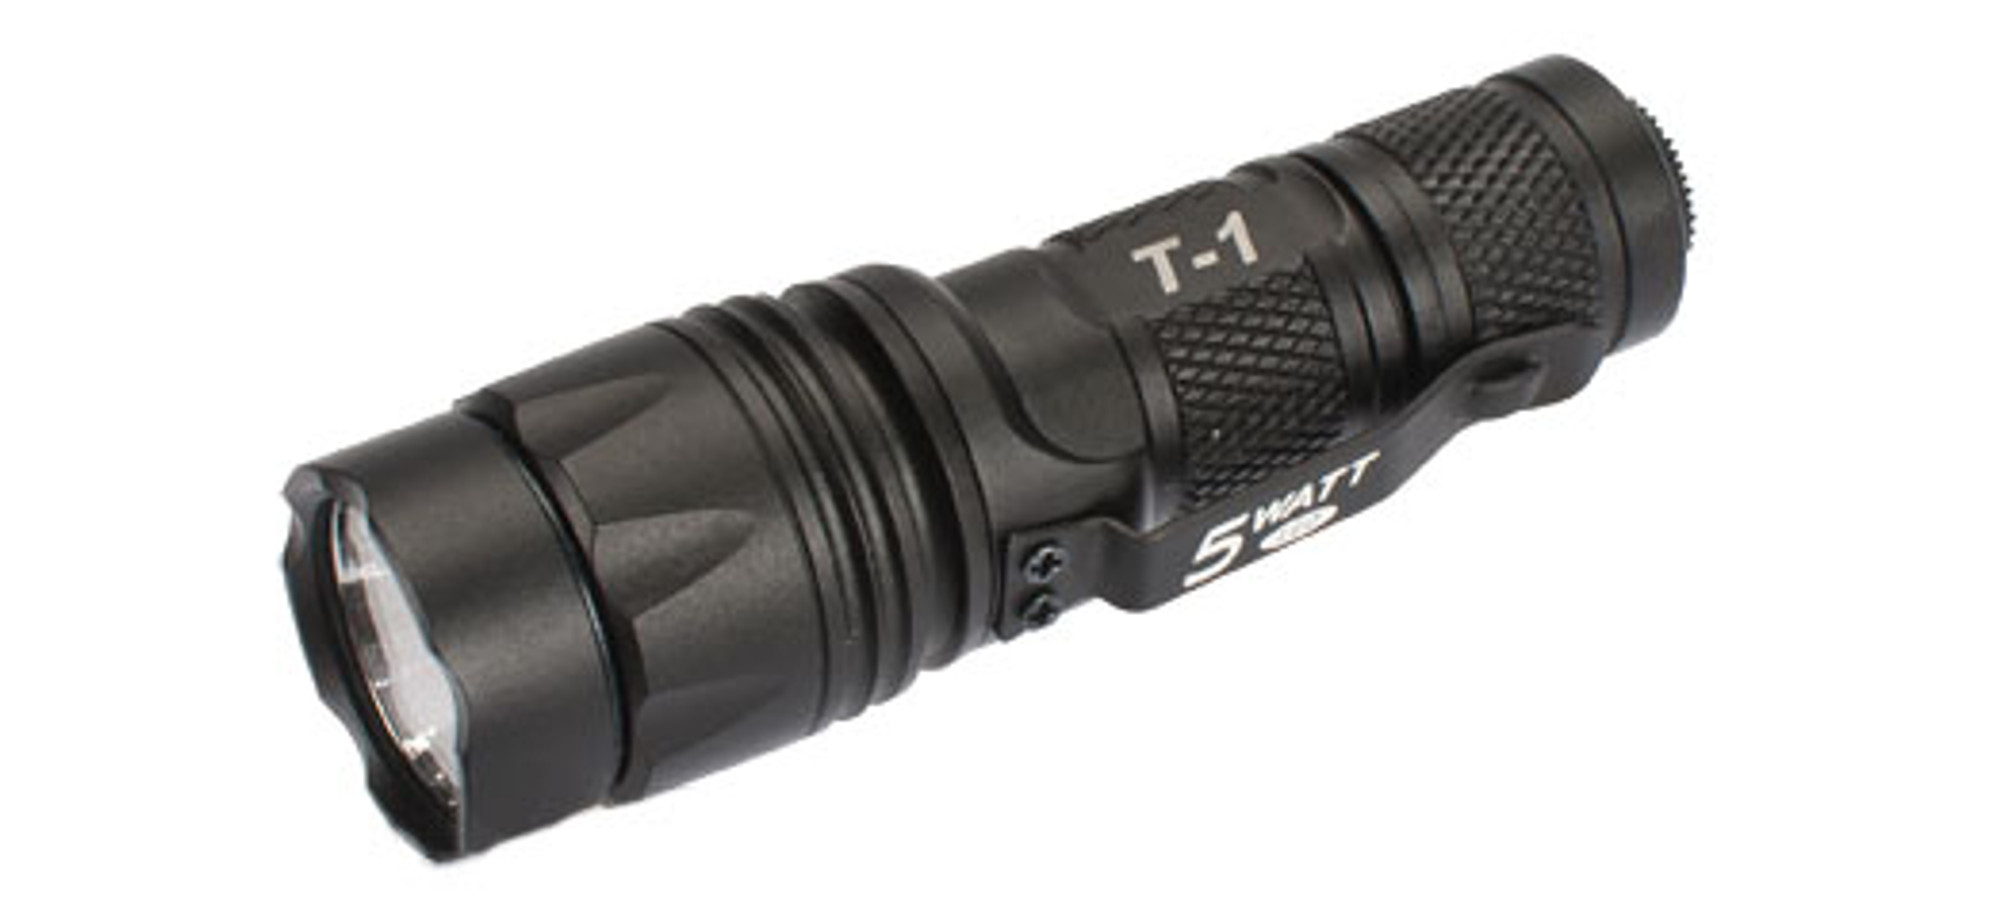 G&P T-1 5 Watt Personal Compact Tactical Light w/ Pressure Switch